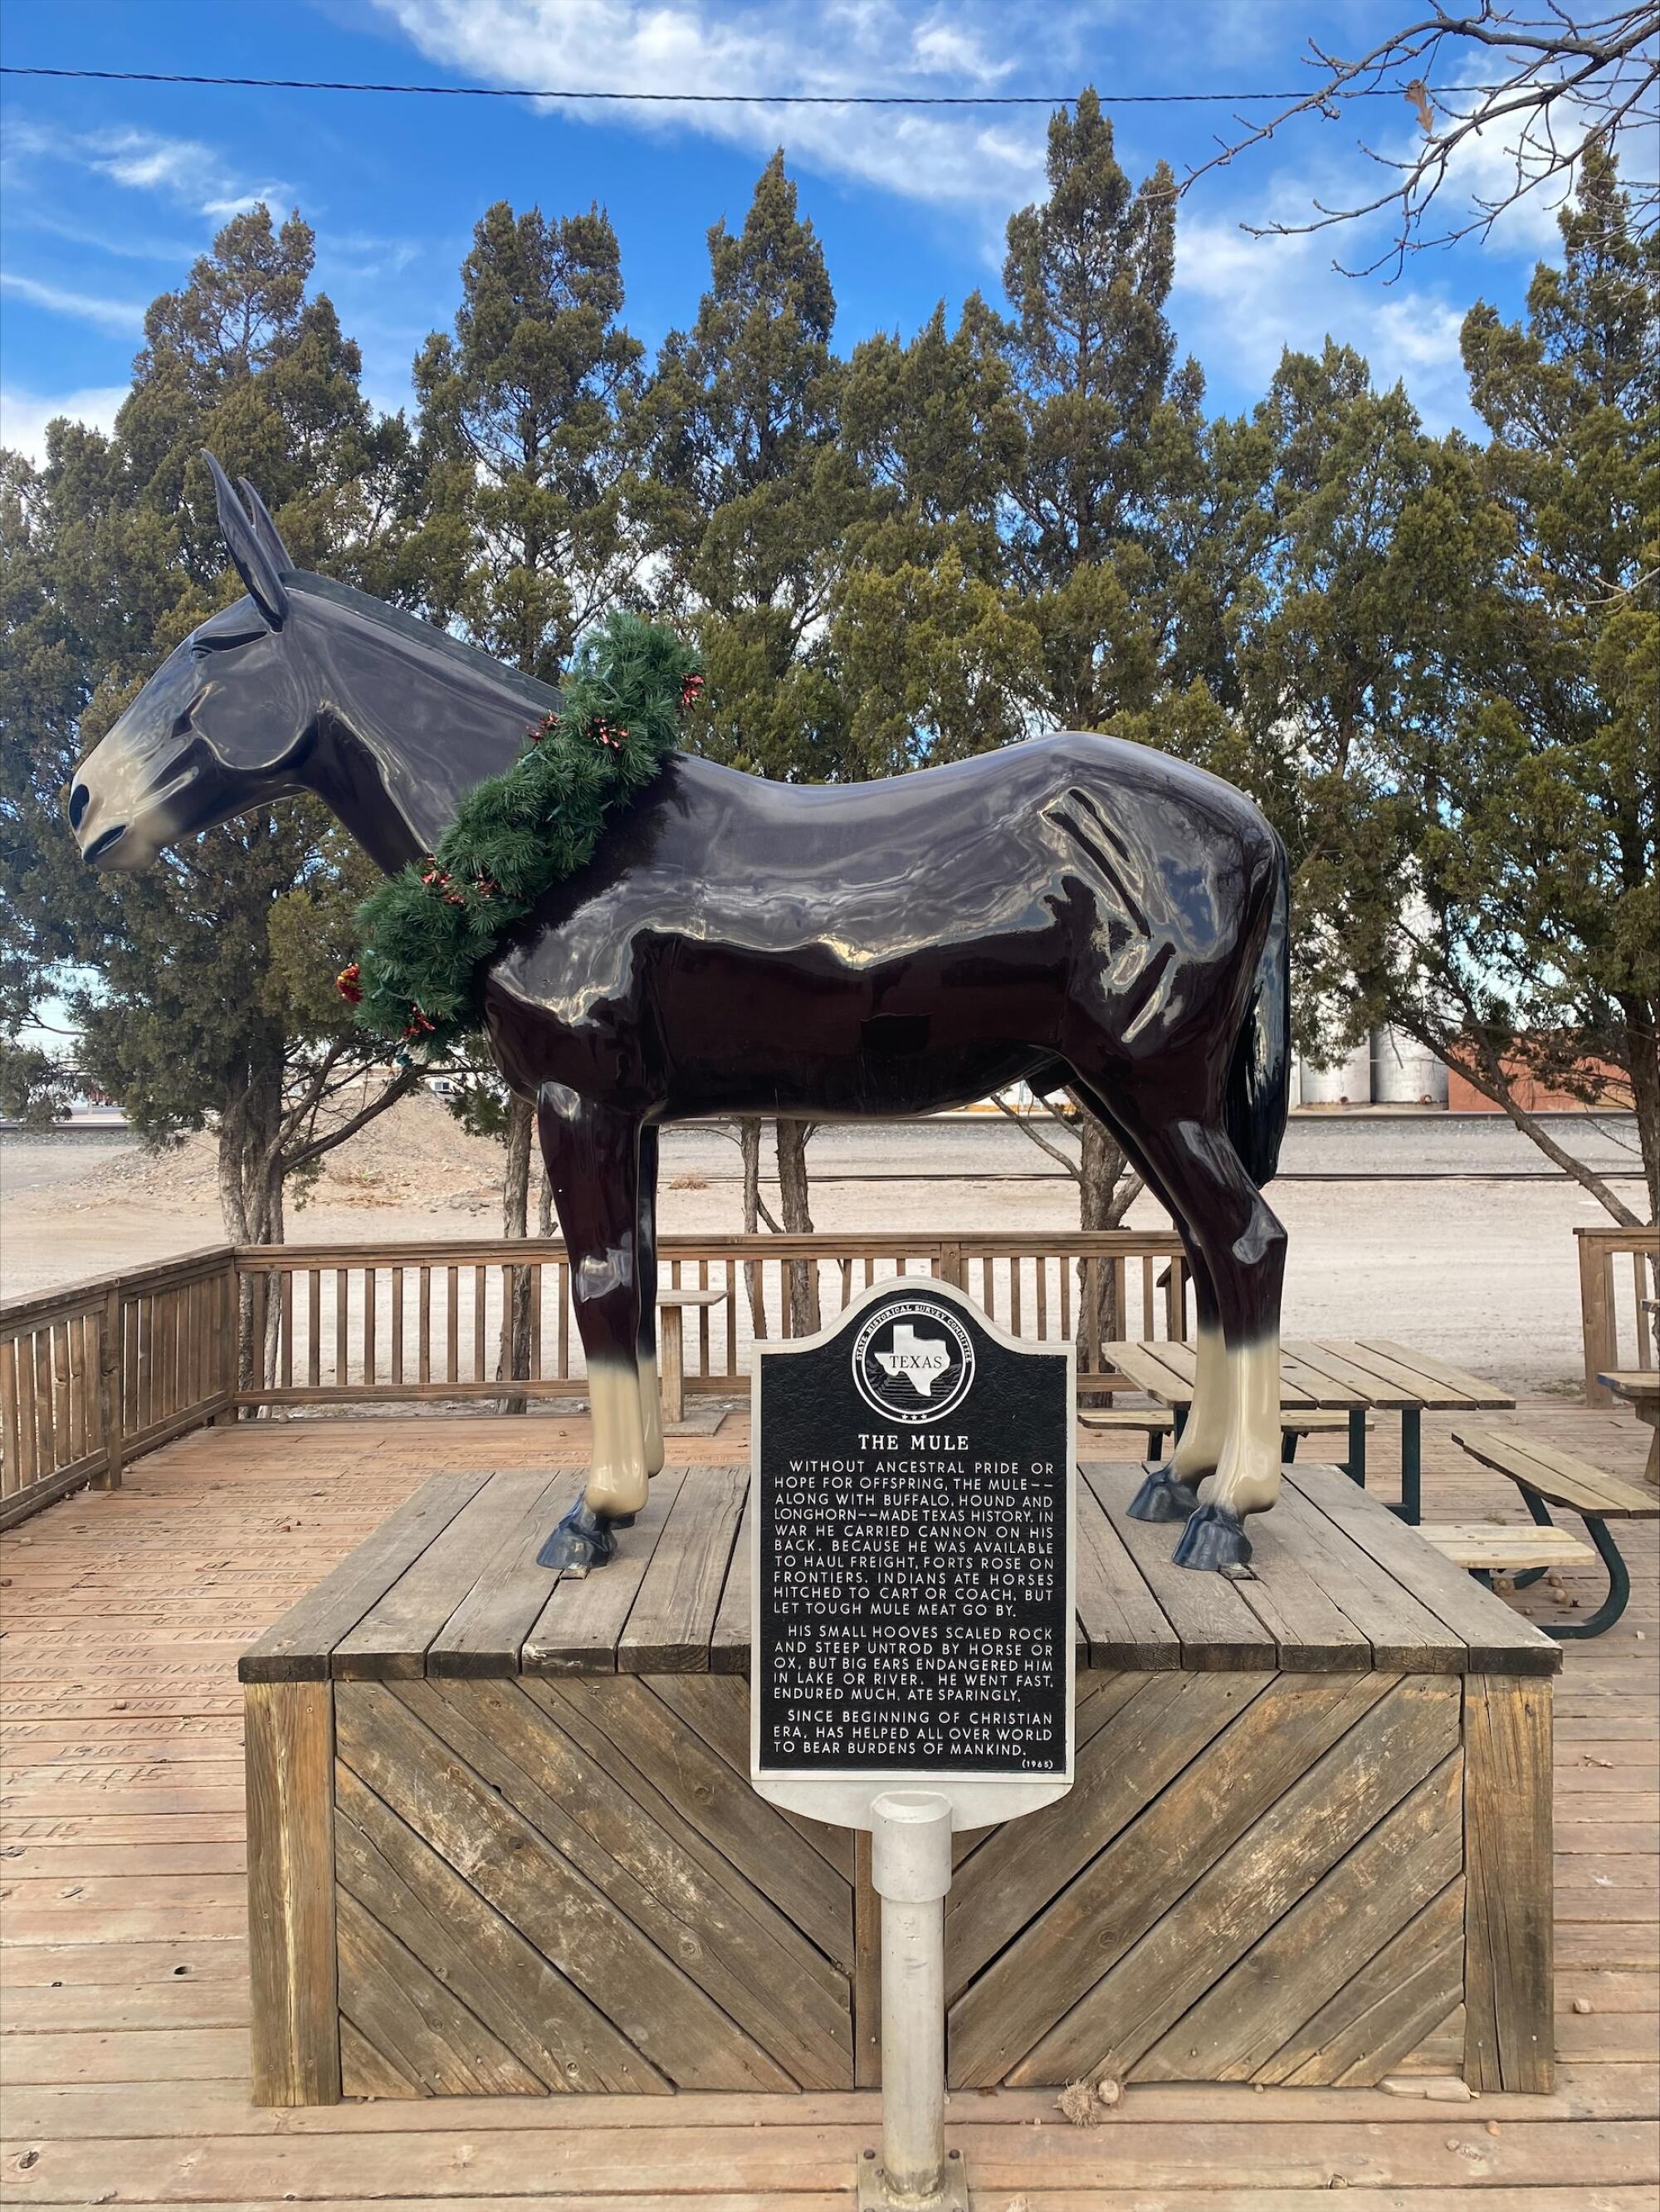 A statue of Old Pete stands near Muleshoe's only stoplight and celebrates the role of the mule in Texas history.